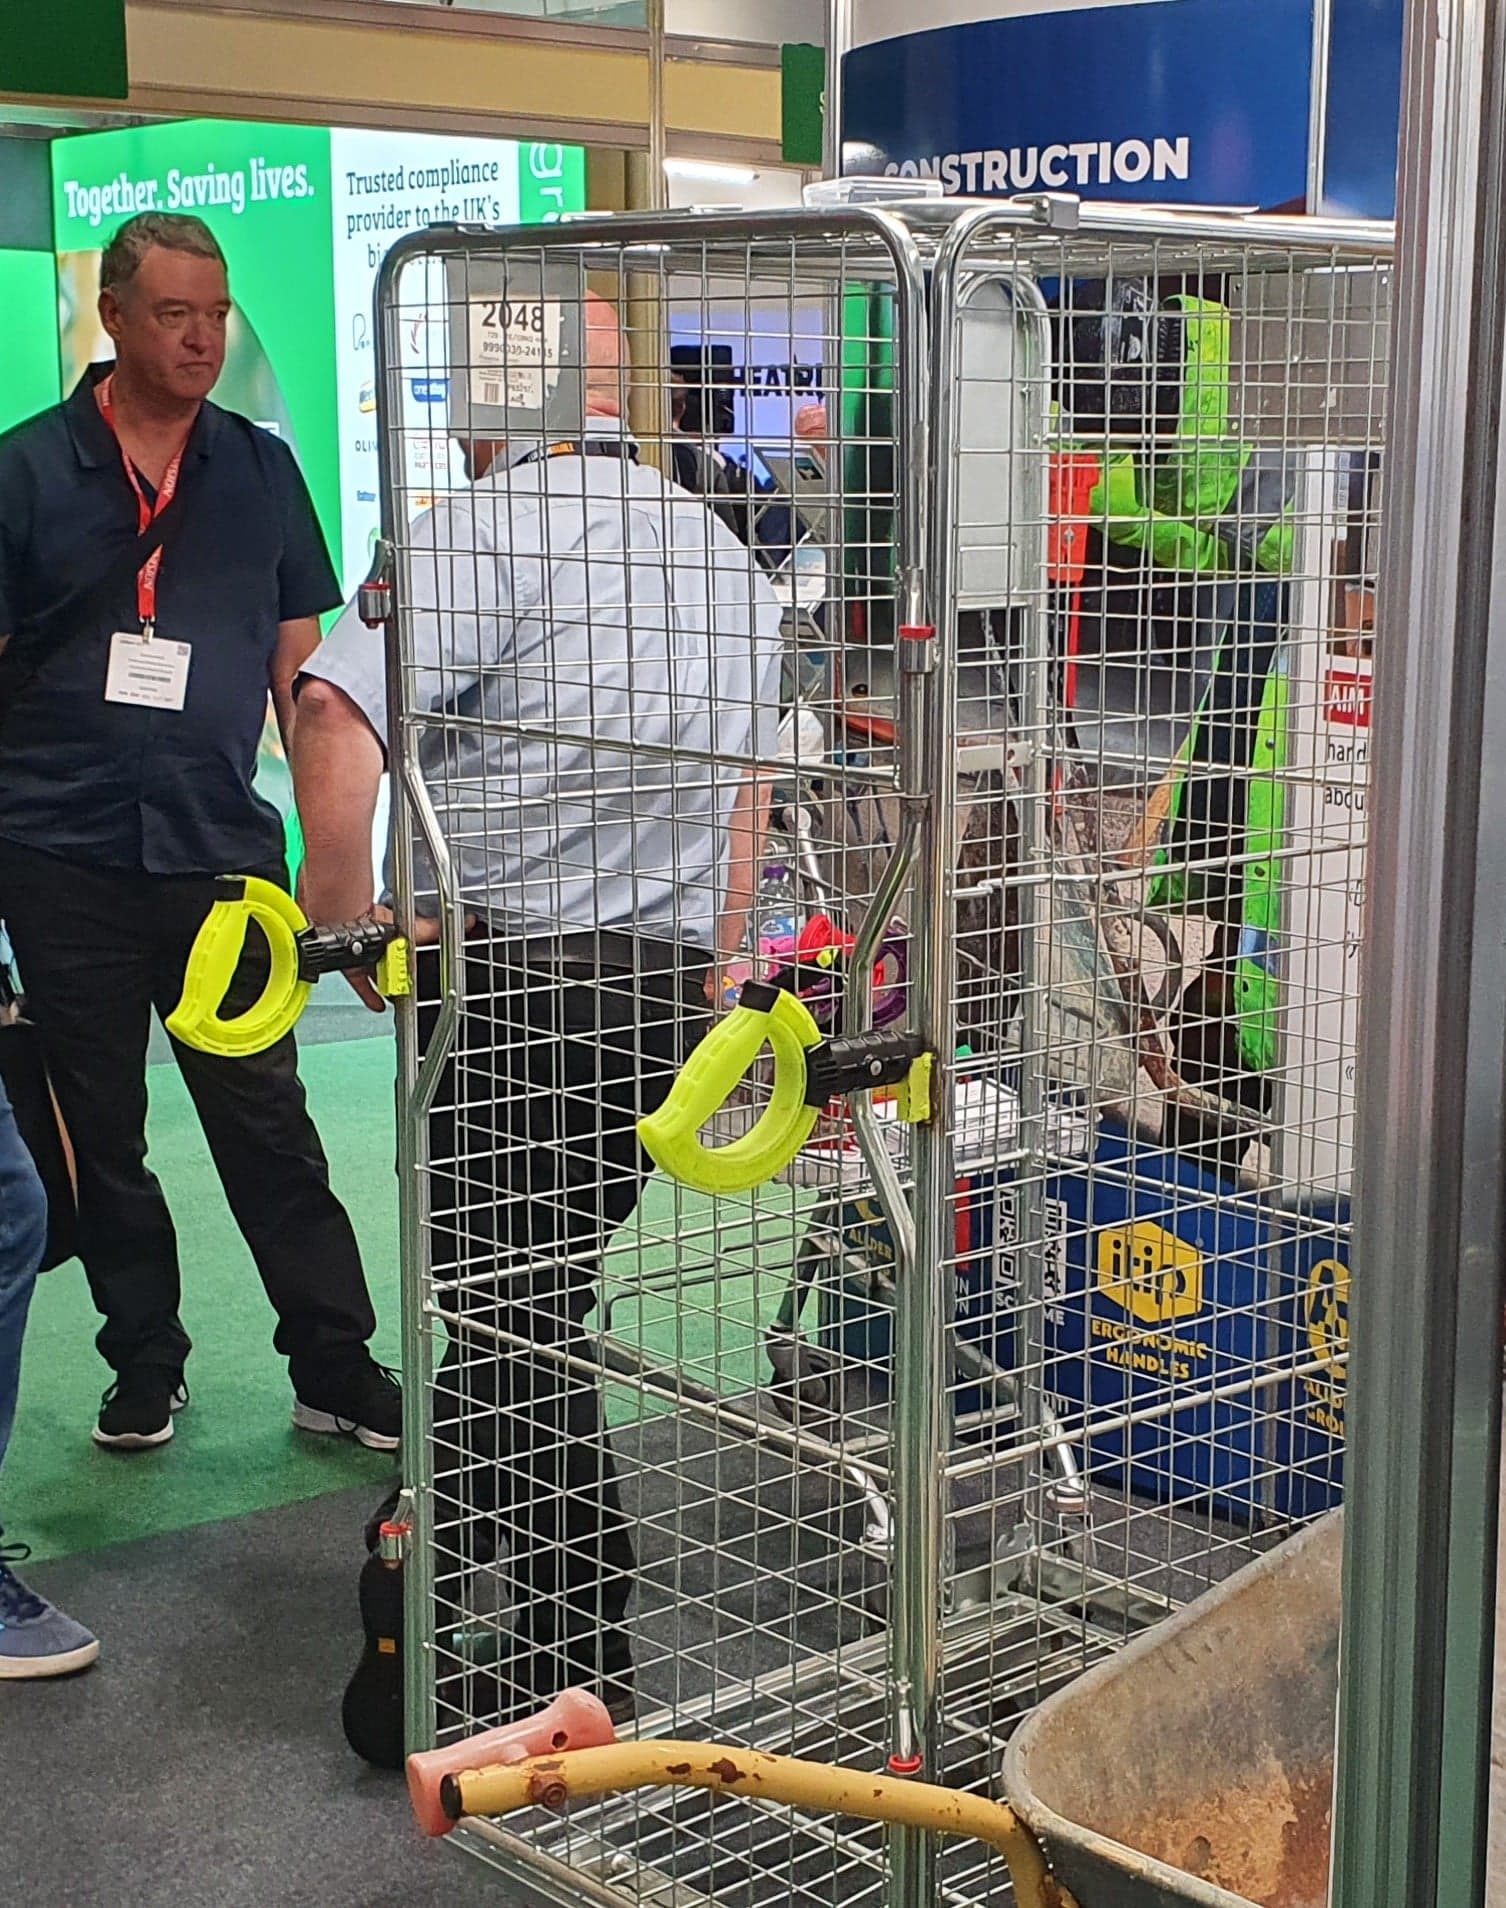 Health & Safety Show Excel 22;  iTip Handles on Roll Cages the star of the show!